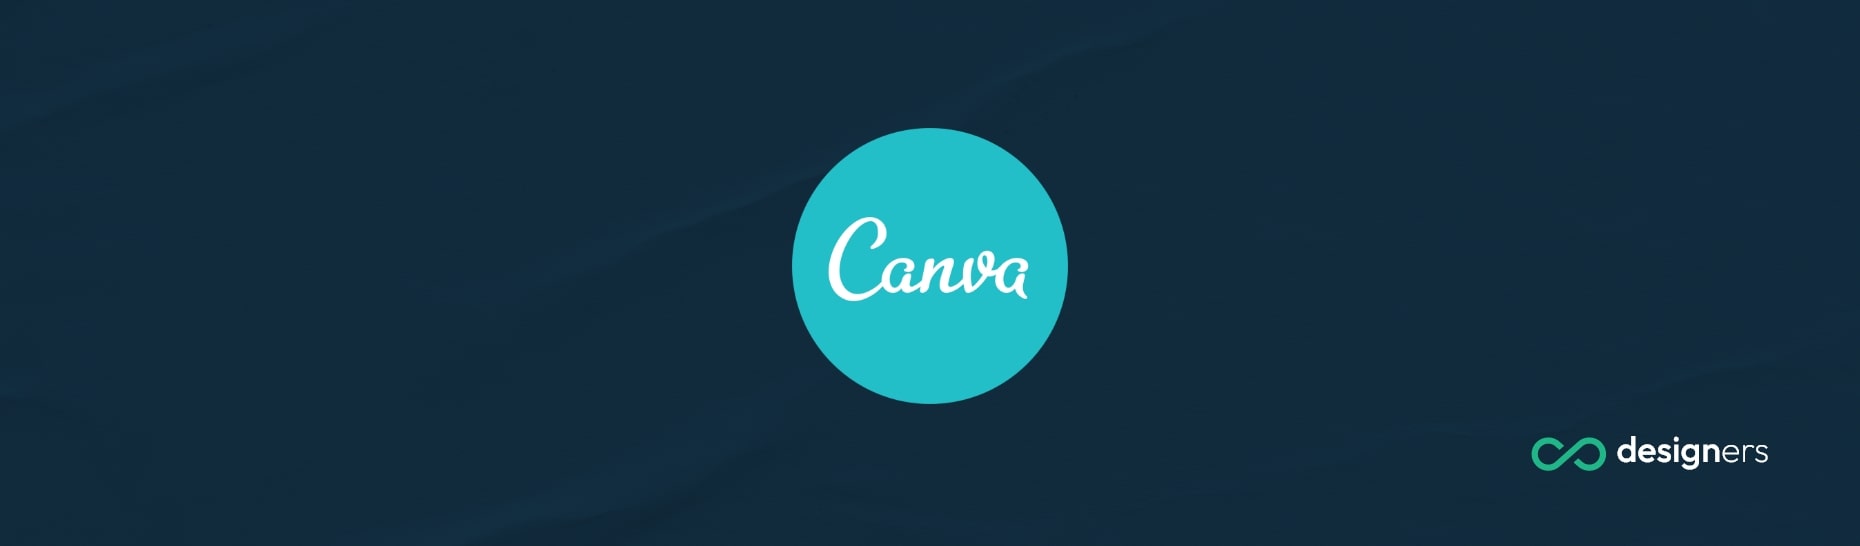 Are Canva Business Cards Good Quality?